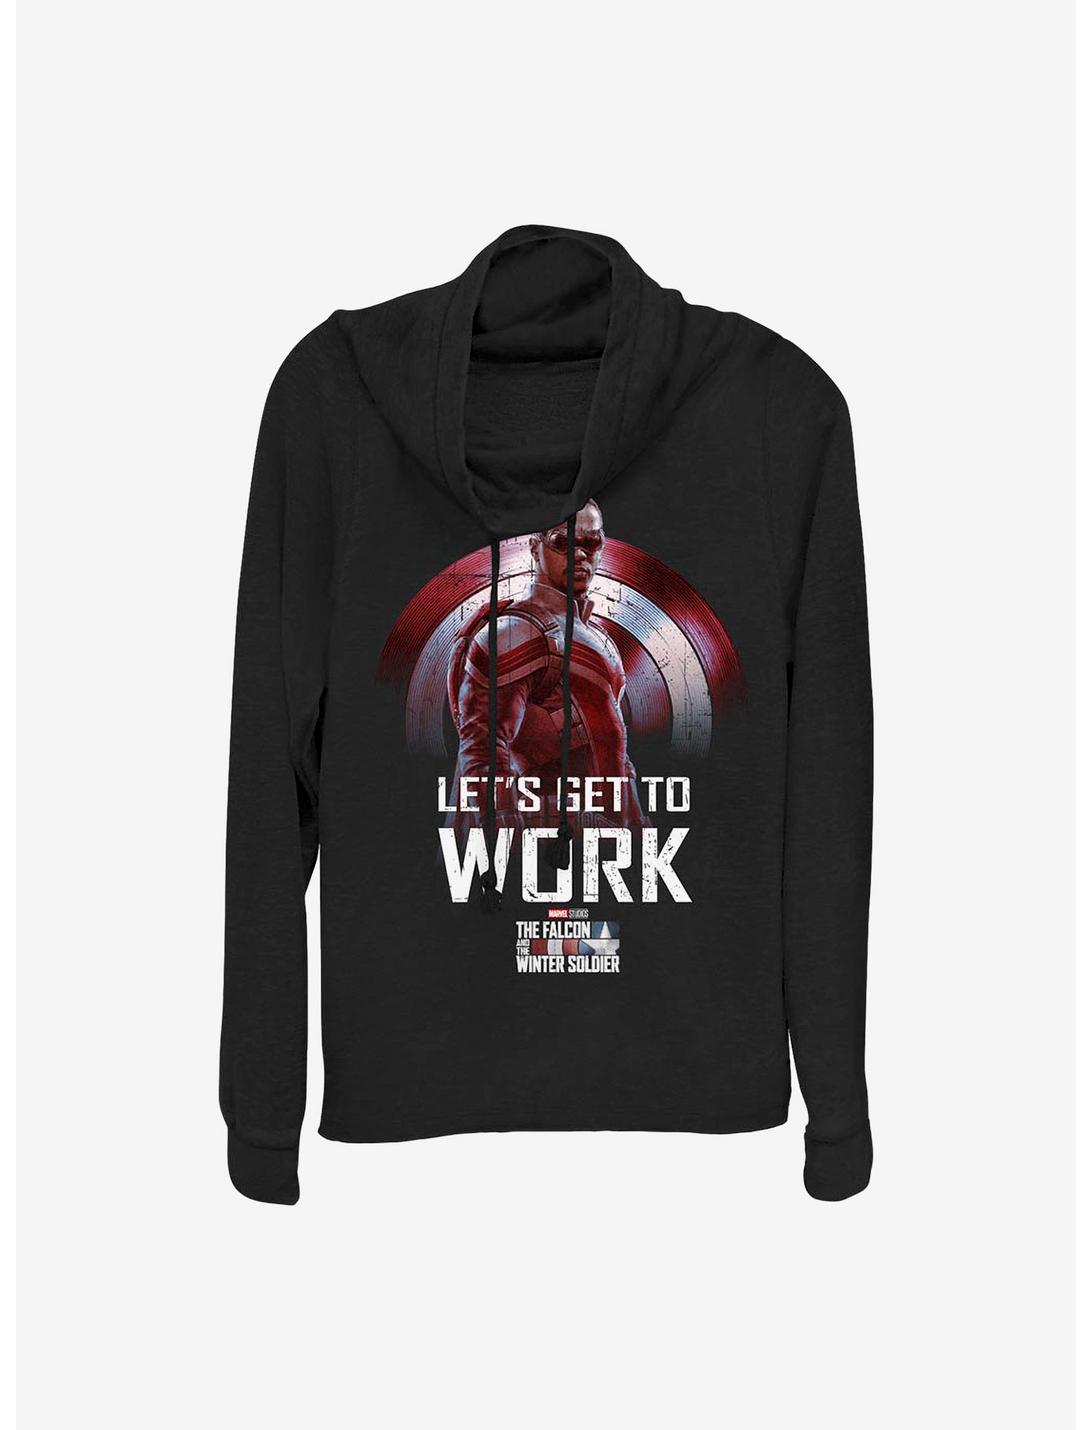 Marvel The Falcon And The Winter Soldier Let's Get To Work Cowlneck Long-Sleeve Girls Top, BLACK, hi-res